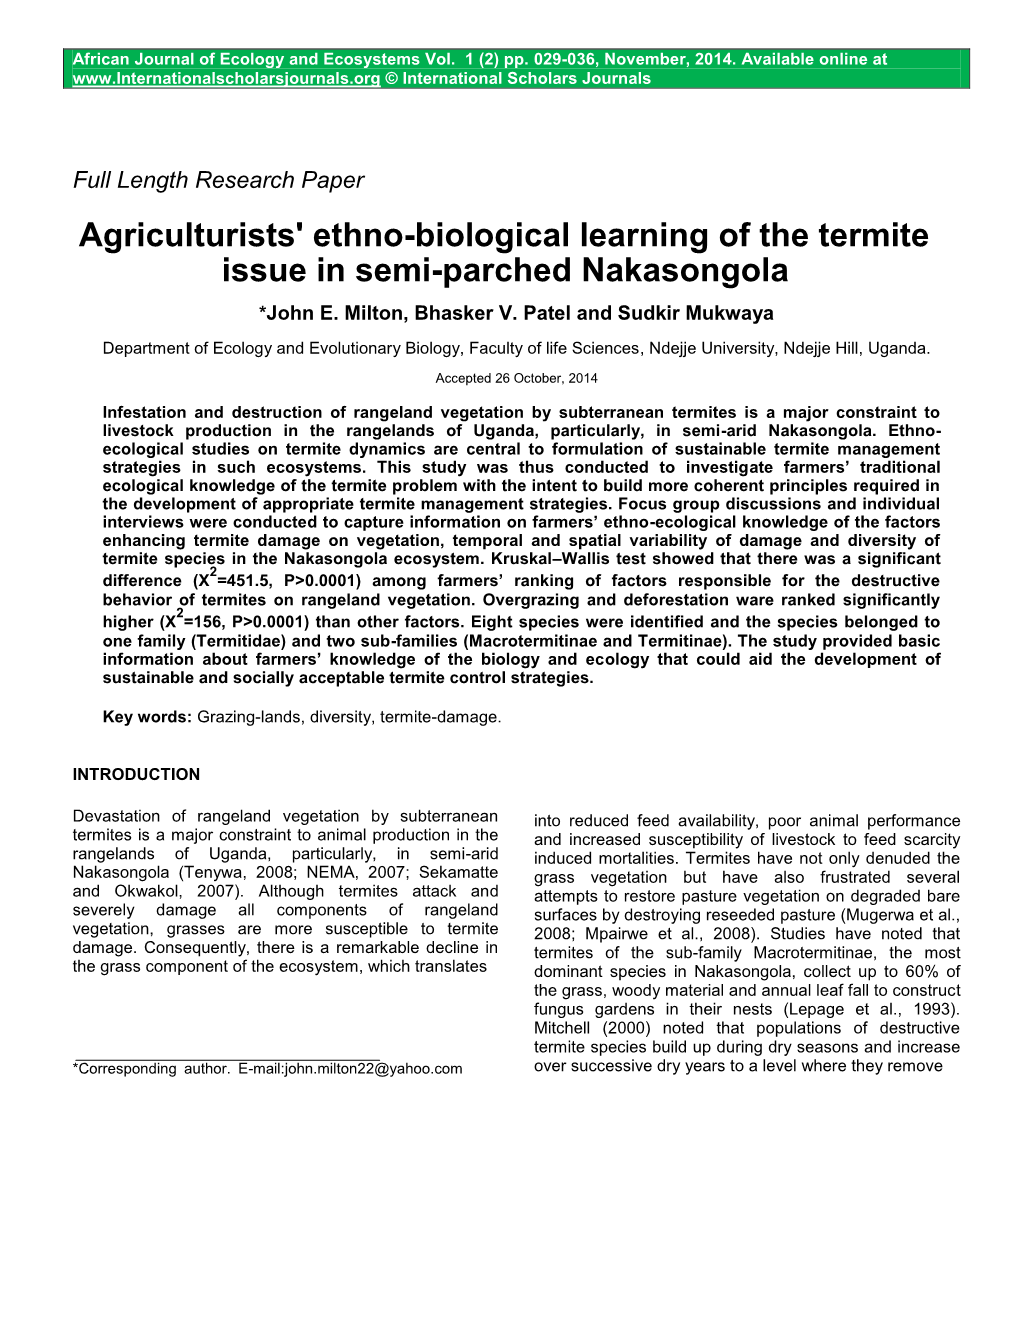 Agriculturists' Ethno-Biological Learning of the Termite Issue in Semi-Parched Nakasongola